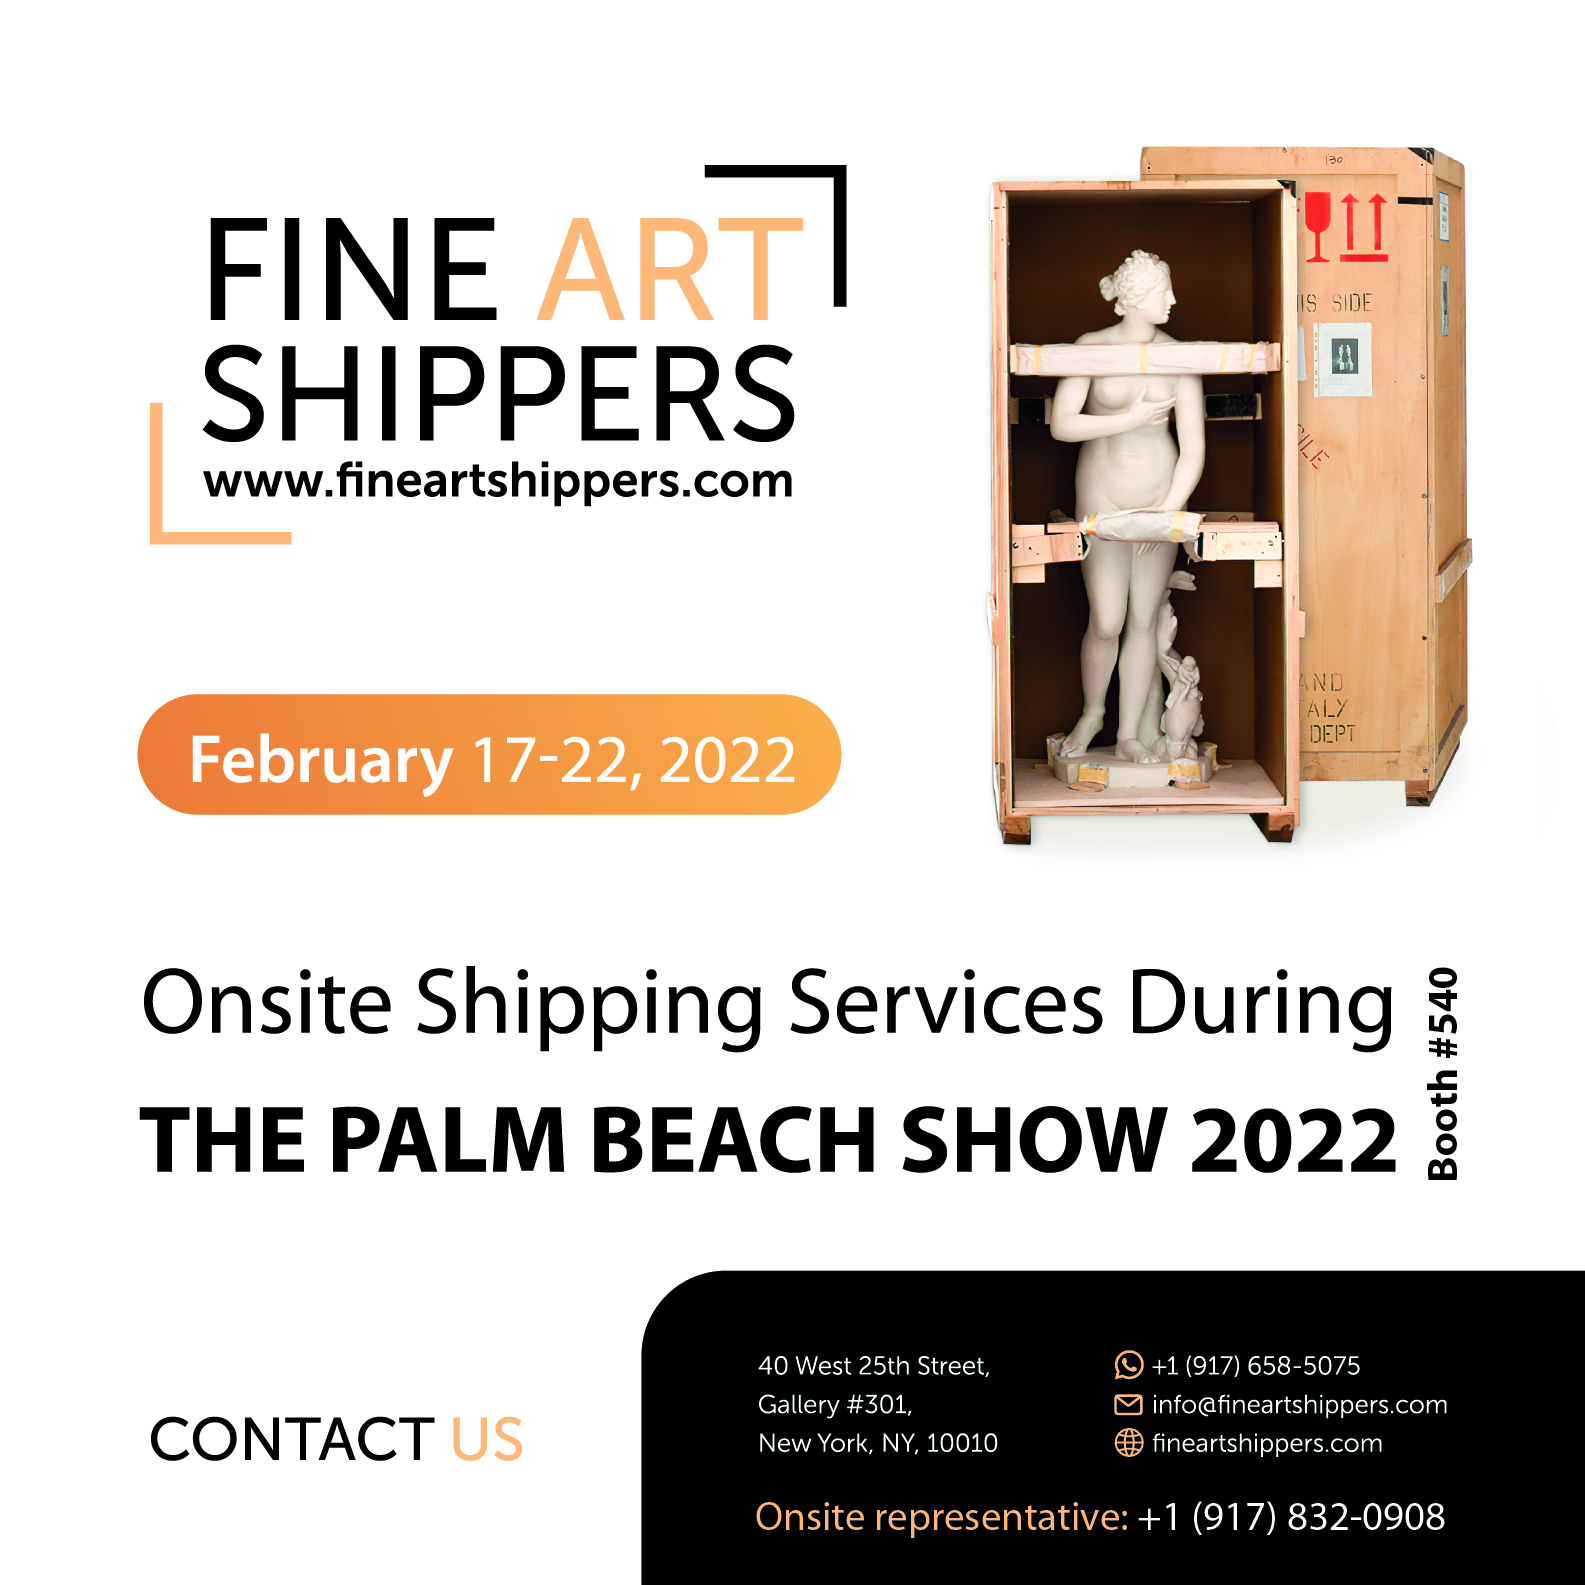 Fine Art Shippers to Become the Onsite Shipper at The Palm Beach Show